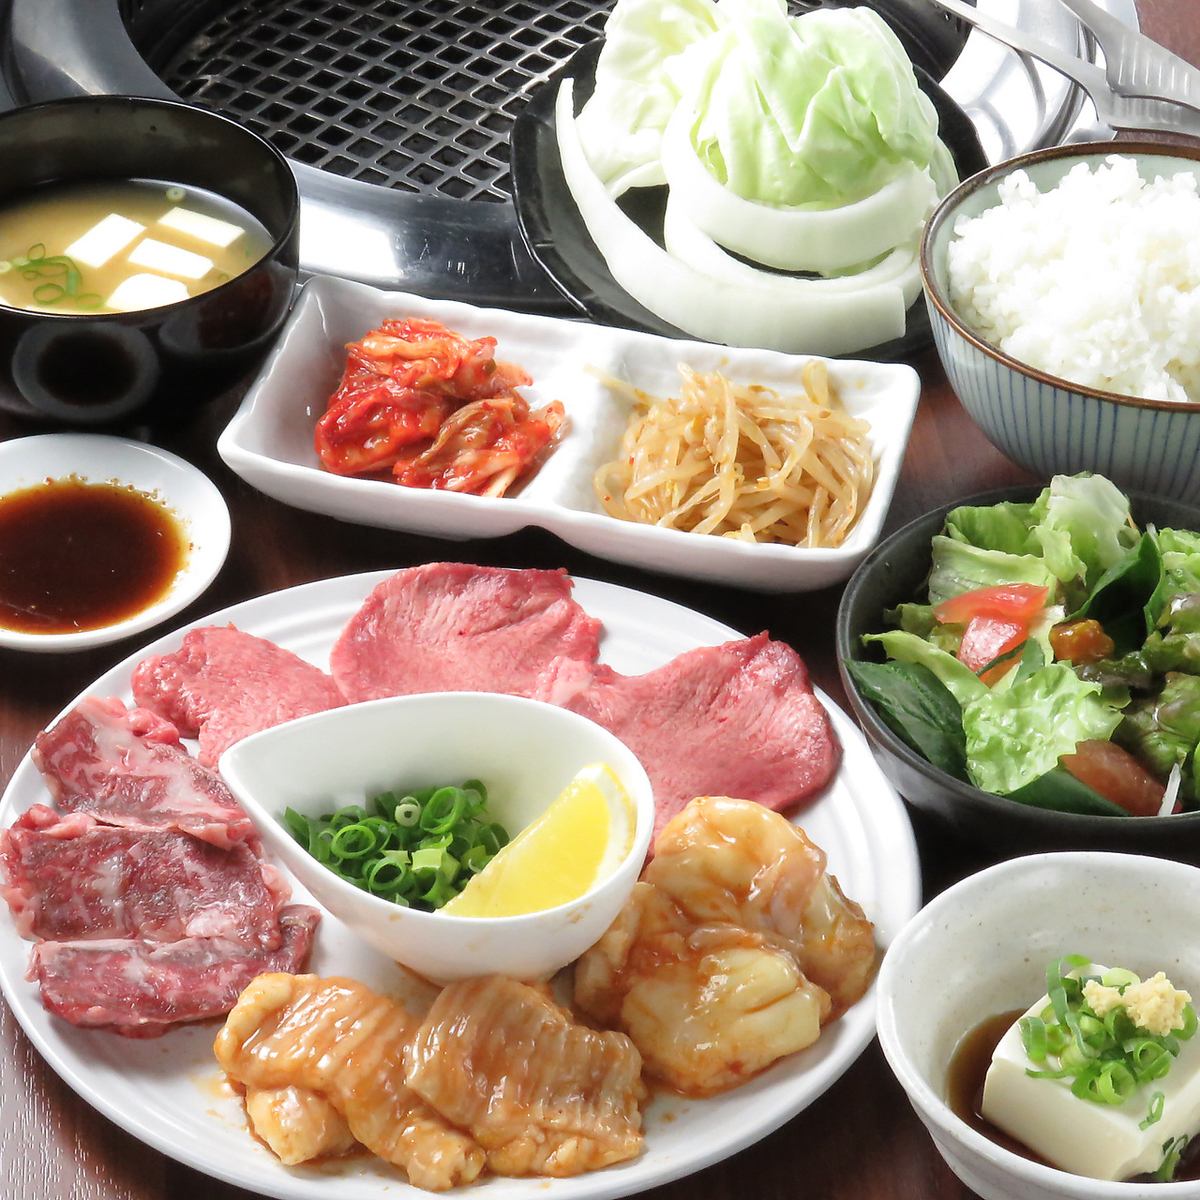 If you want to have a yakiniku lunch, go to "Gyumai"